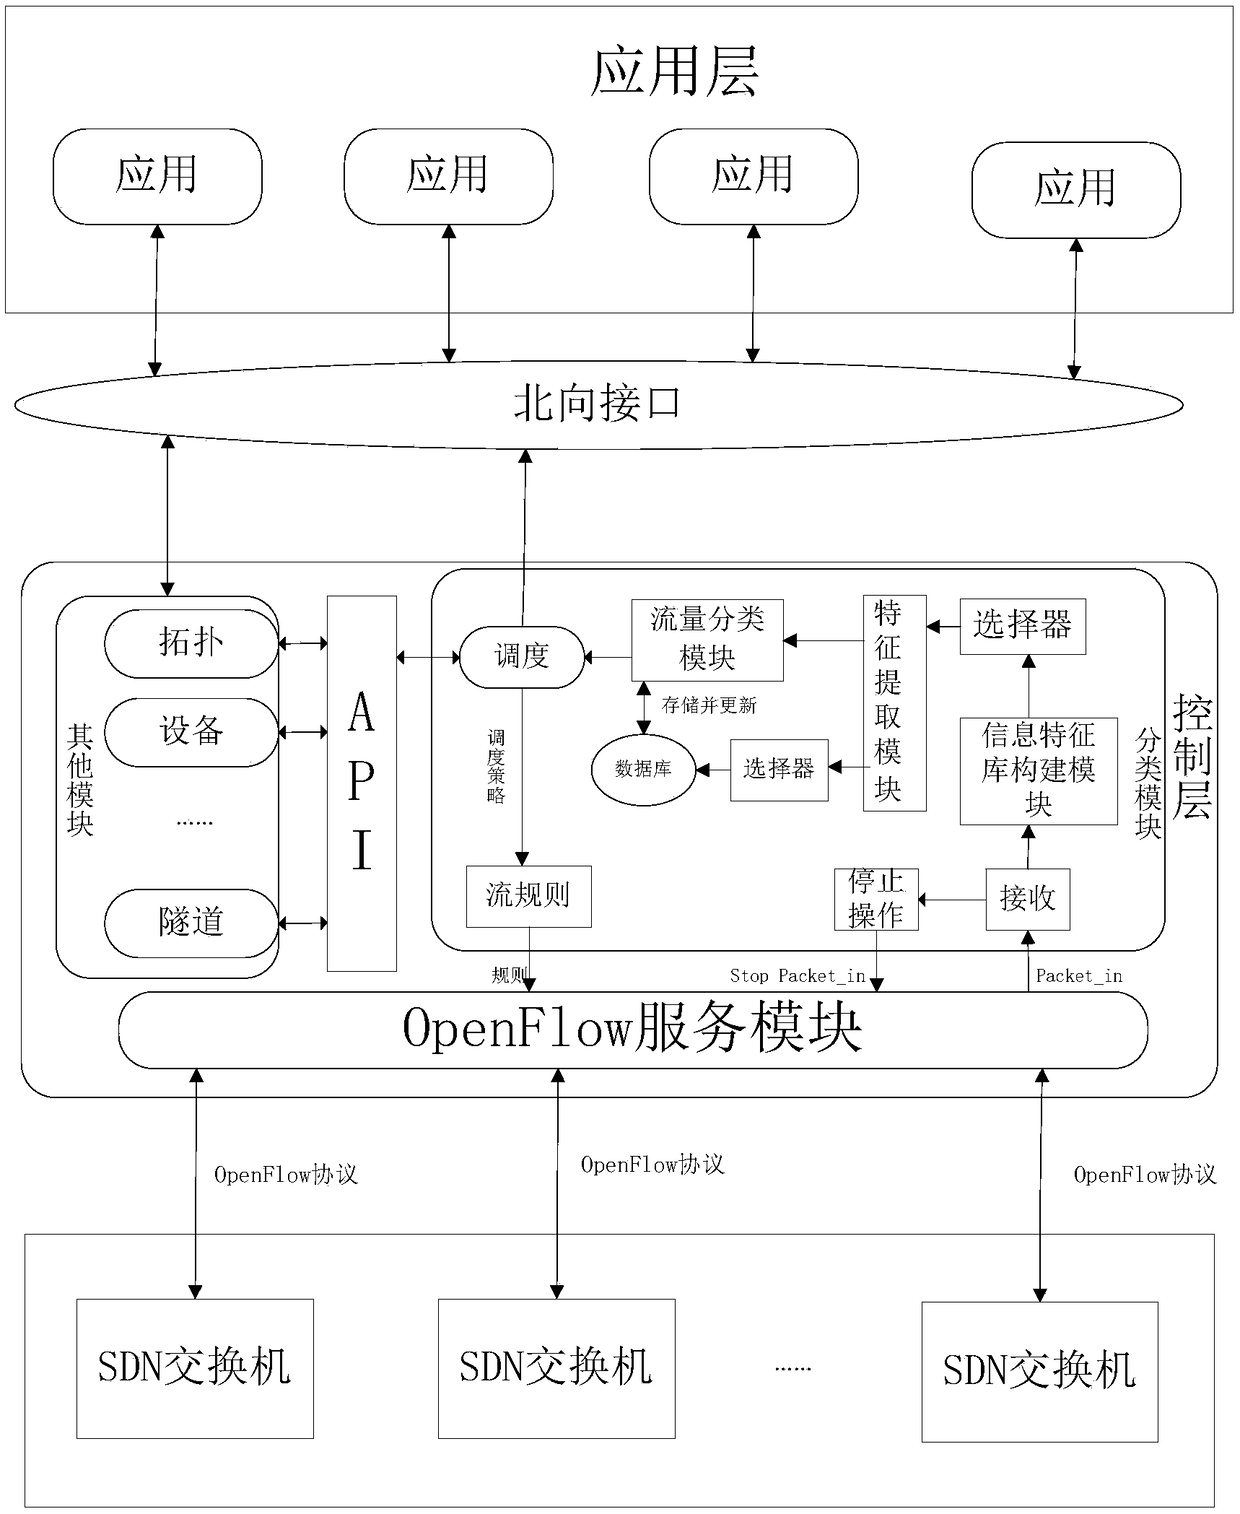 SDN (Software Defined Networking) controller for flow classification based on DPI (Deep Packet Inspection) and machine learning algorithm